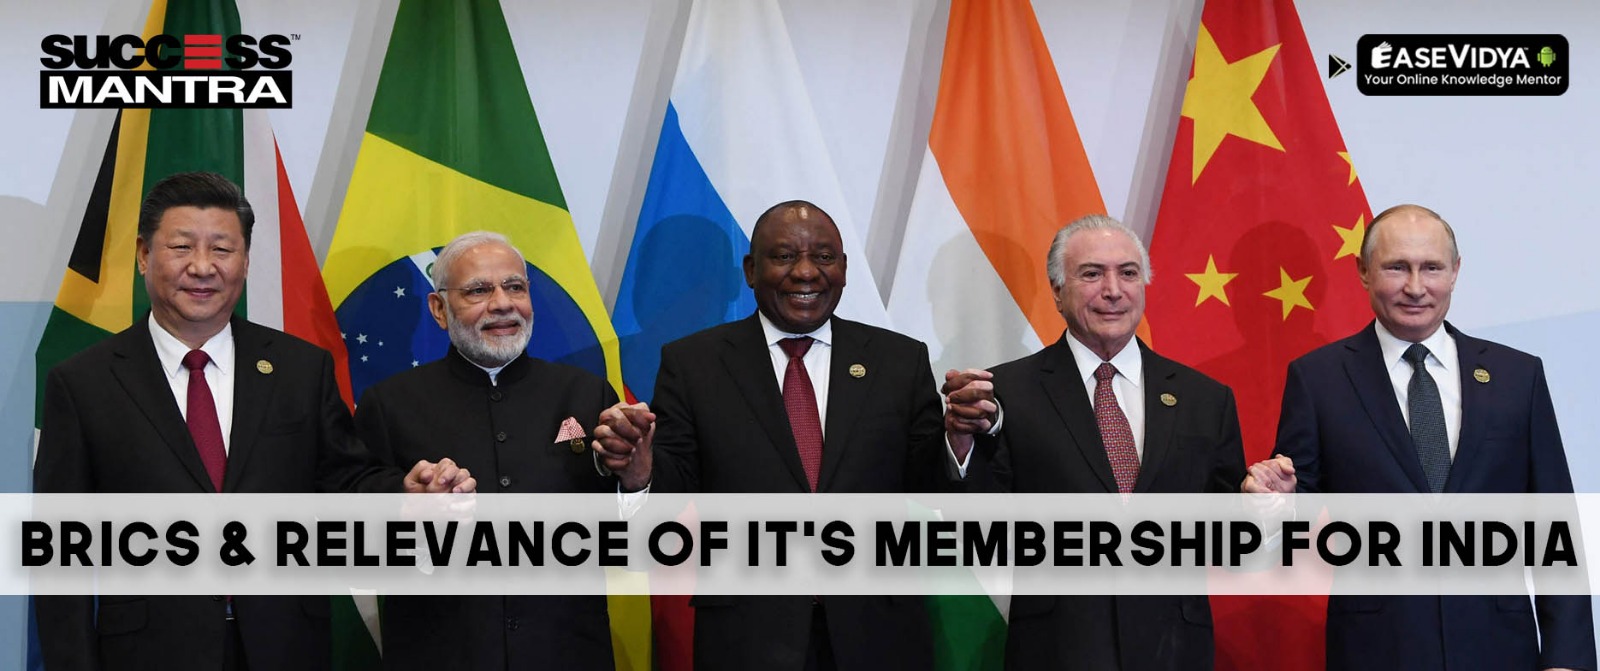 BRICS and the Relevance of its Membership for India